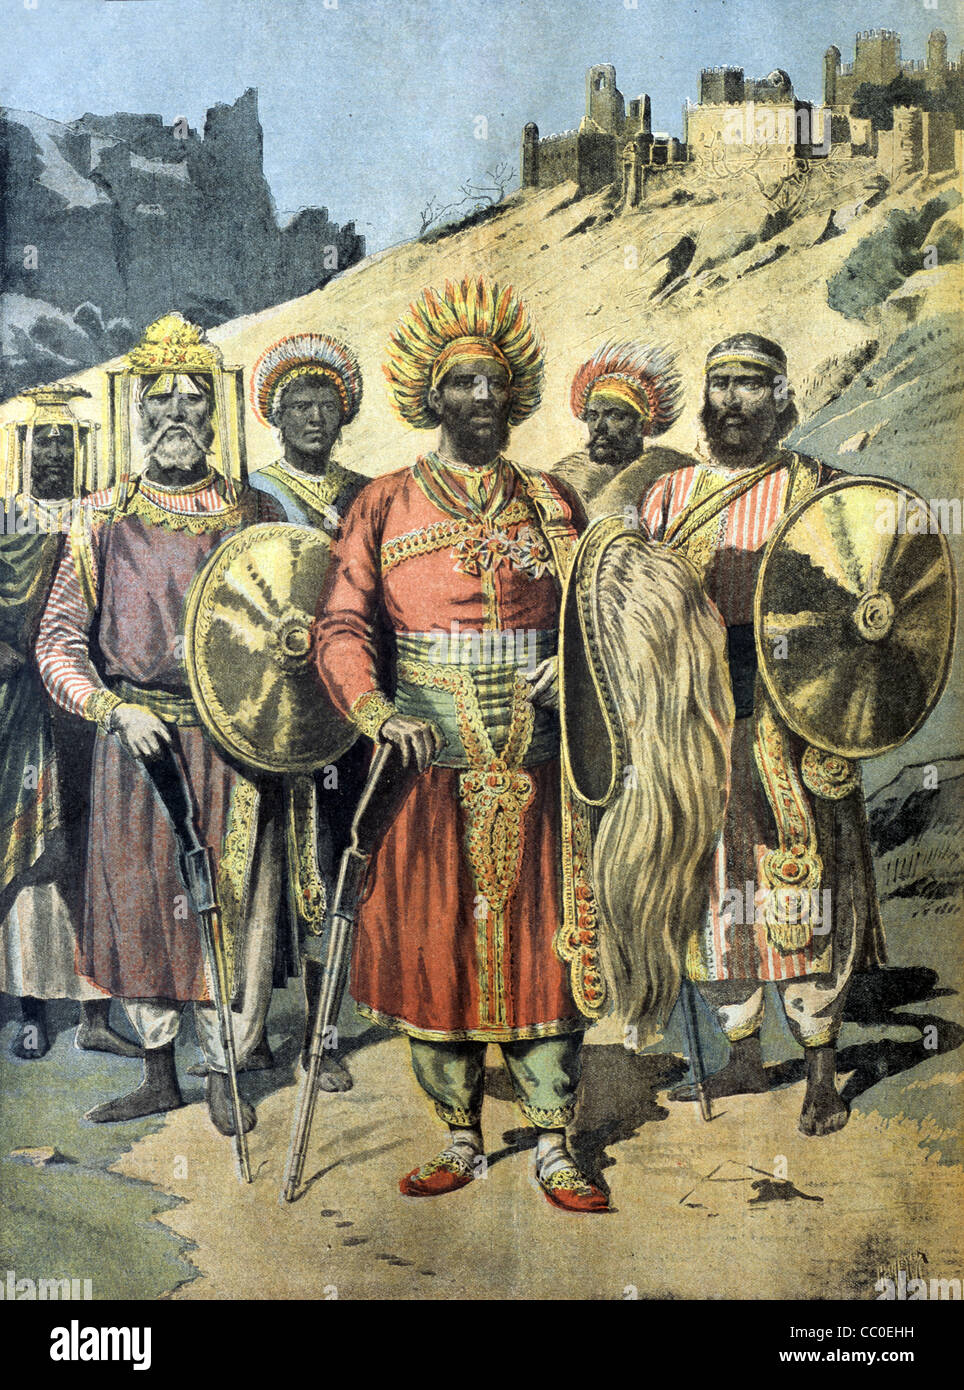 Menelik II (1844-1913) Emperor of Ethiopia (Abyssinia) with his Royal Guard, Soldiers or Courtiers, c19th Engraving Stock Photo